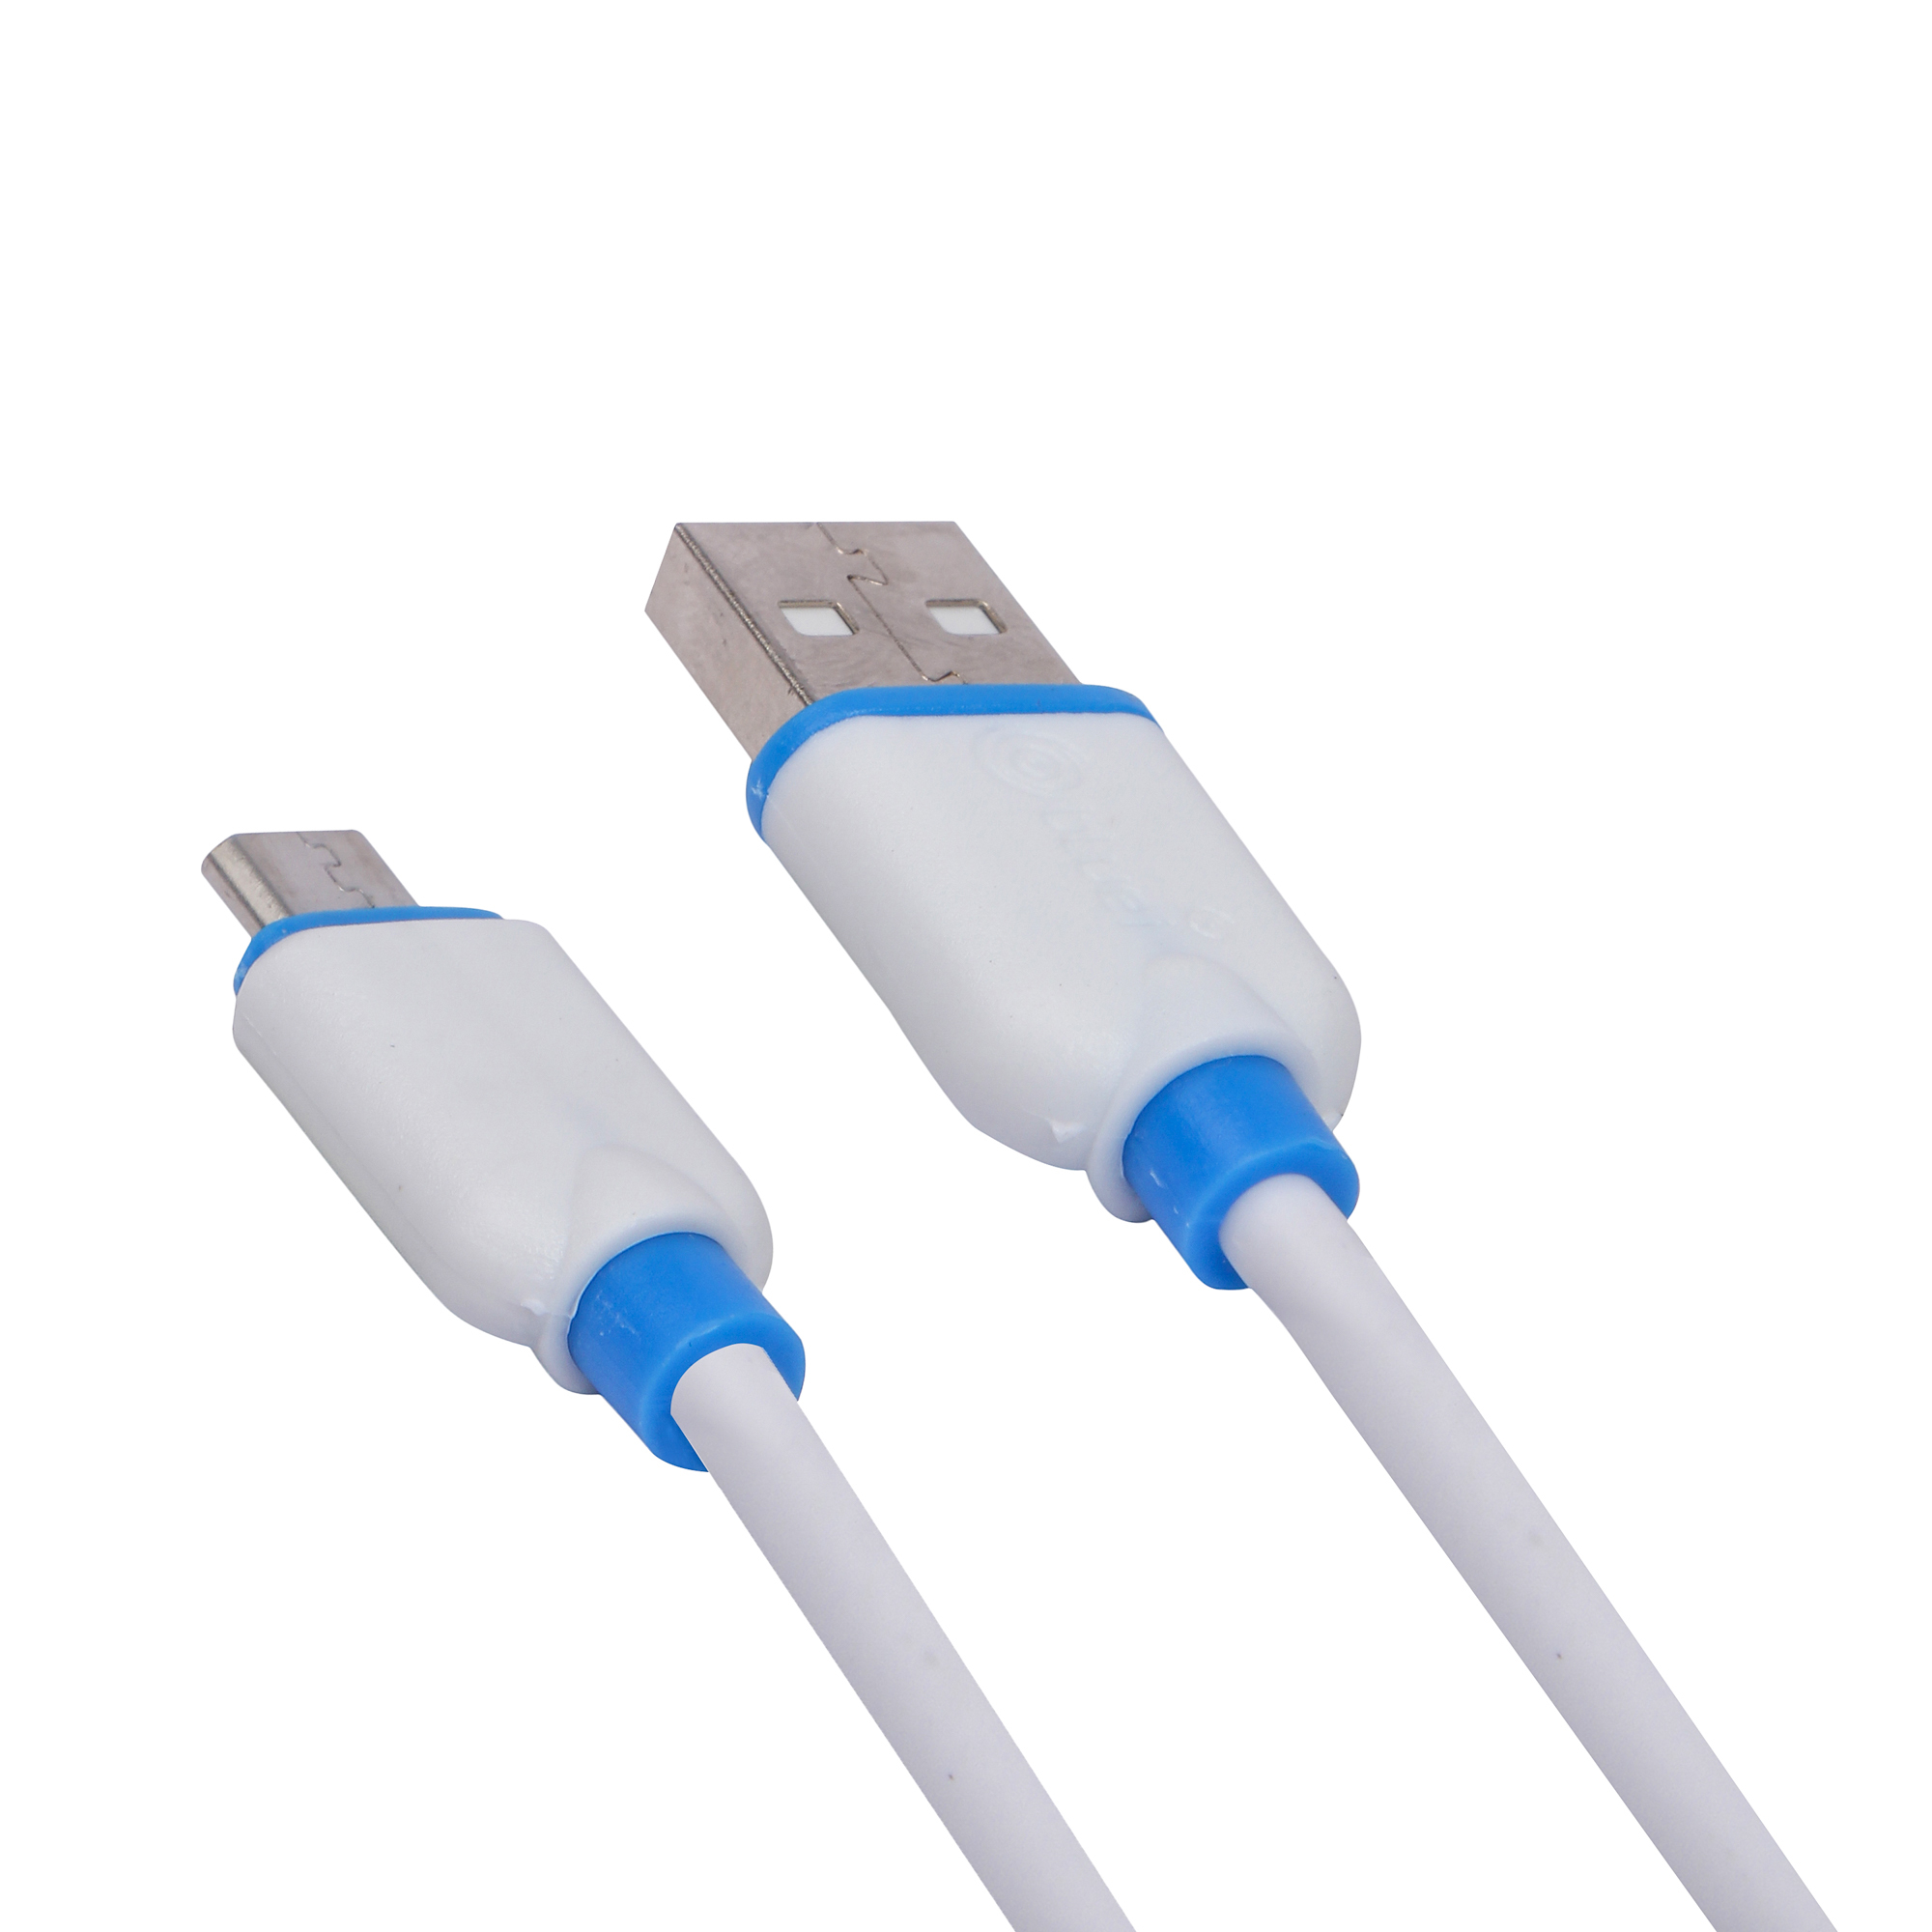 Sp-02 2.8 Amp Micro Fast Bluei Data Cable